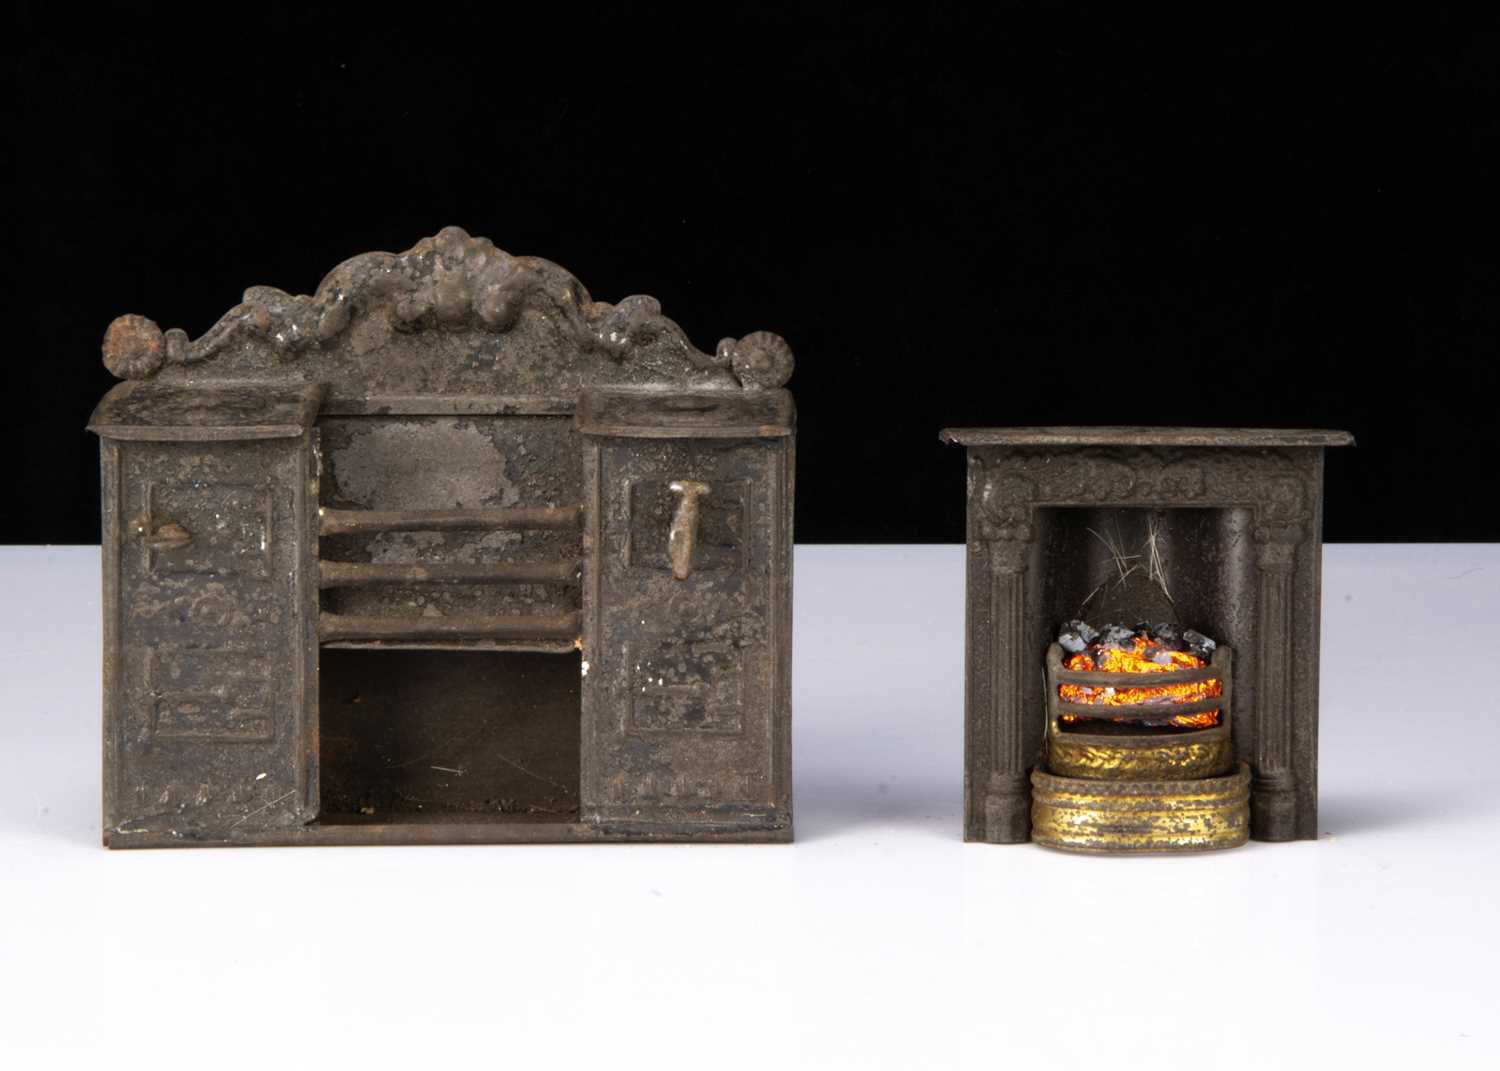 Lot 24 - An Evans & Cartwright tinplate dolls’ house range and fireplace